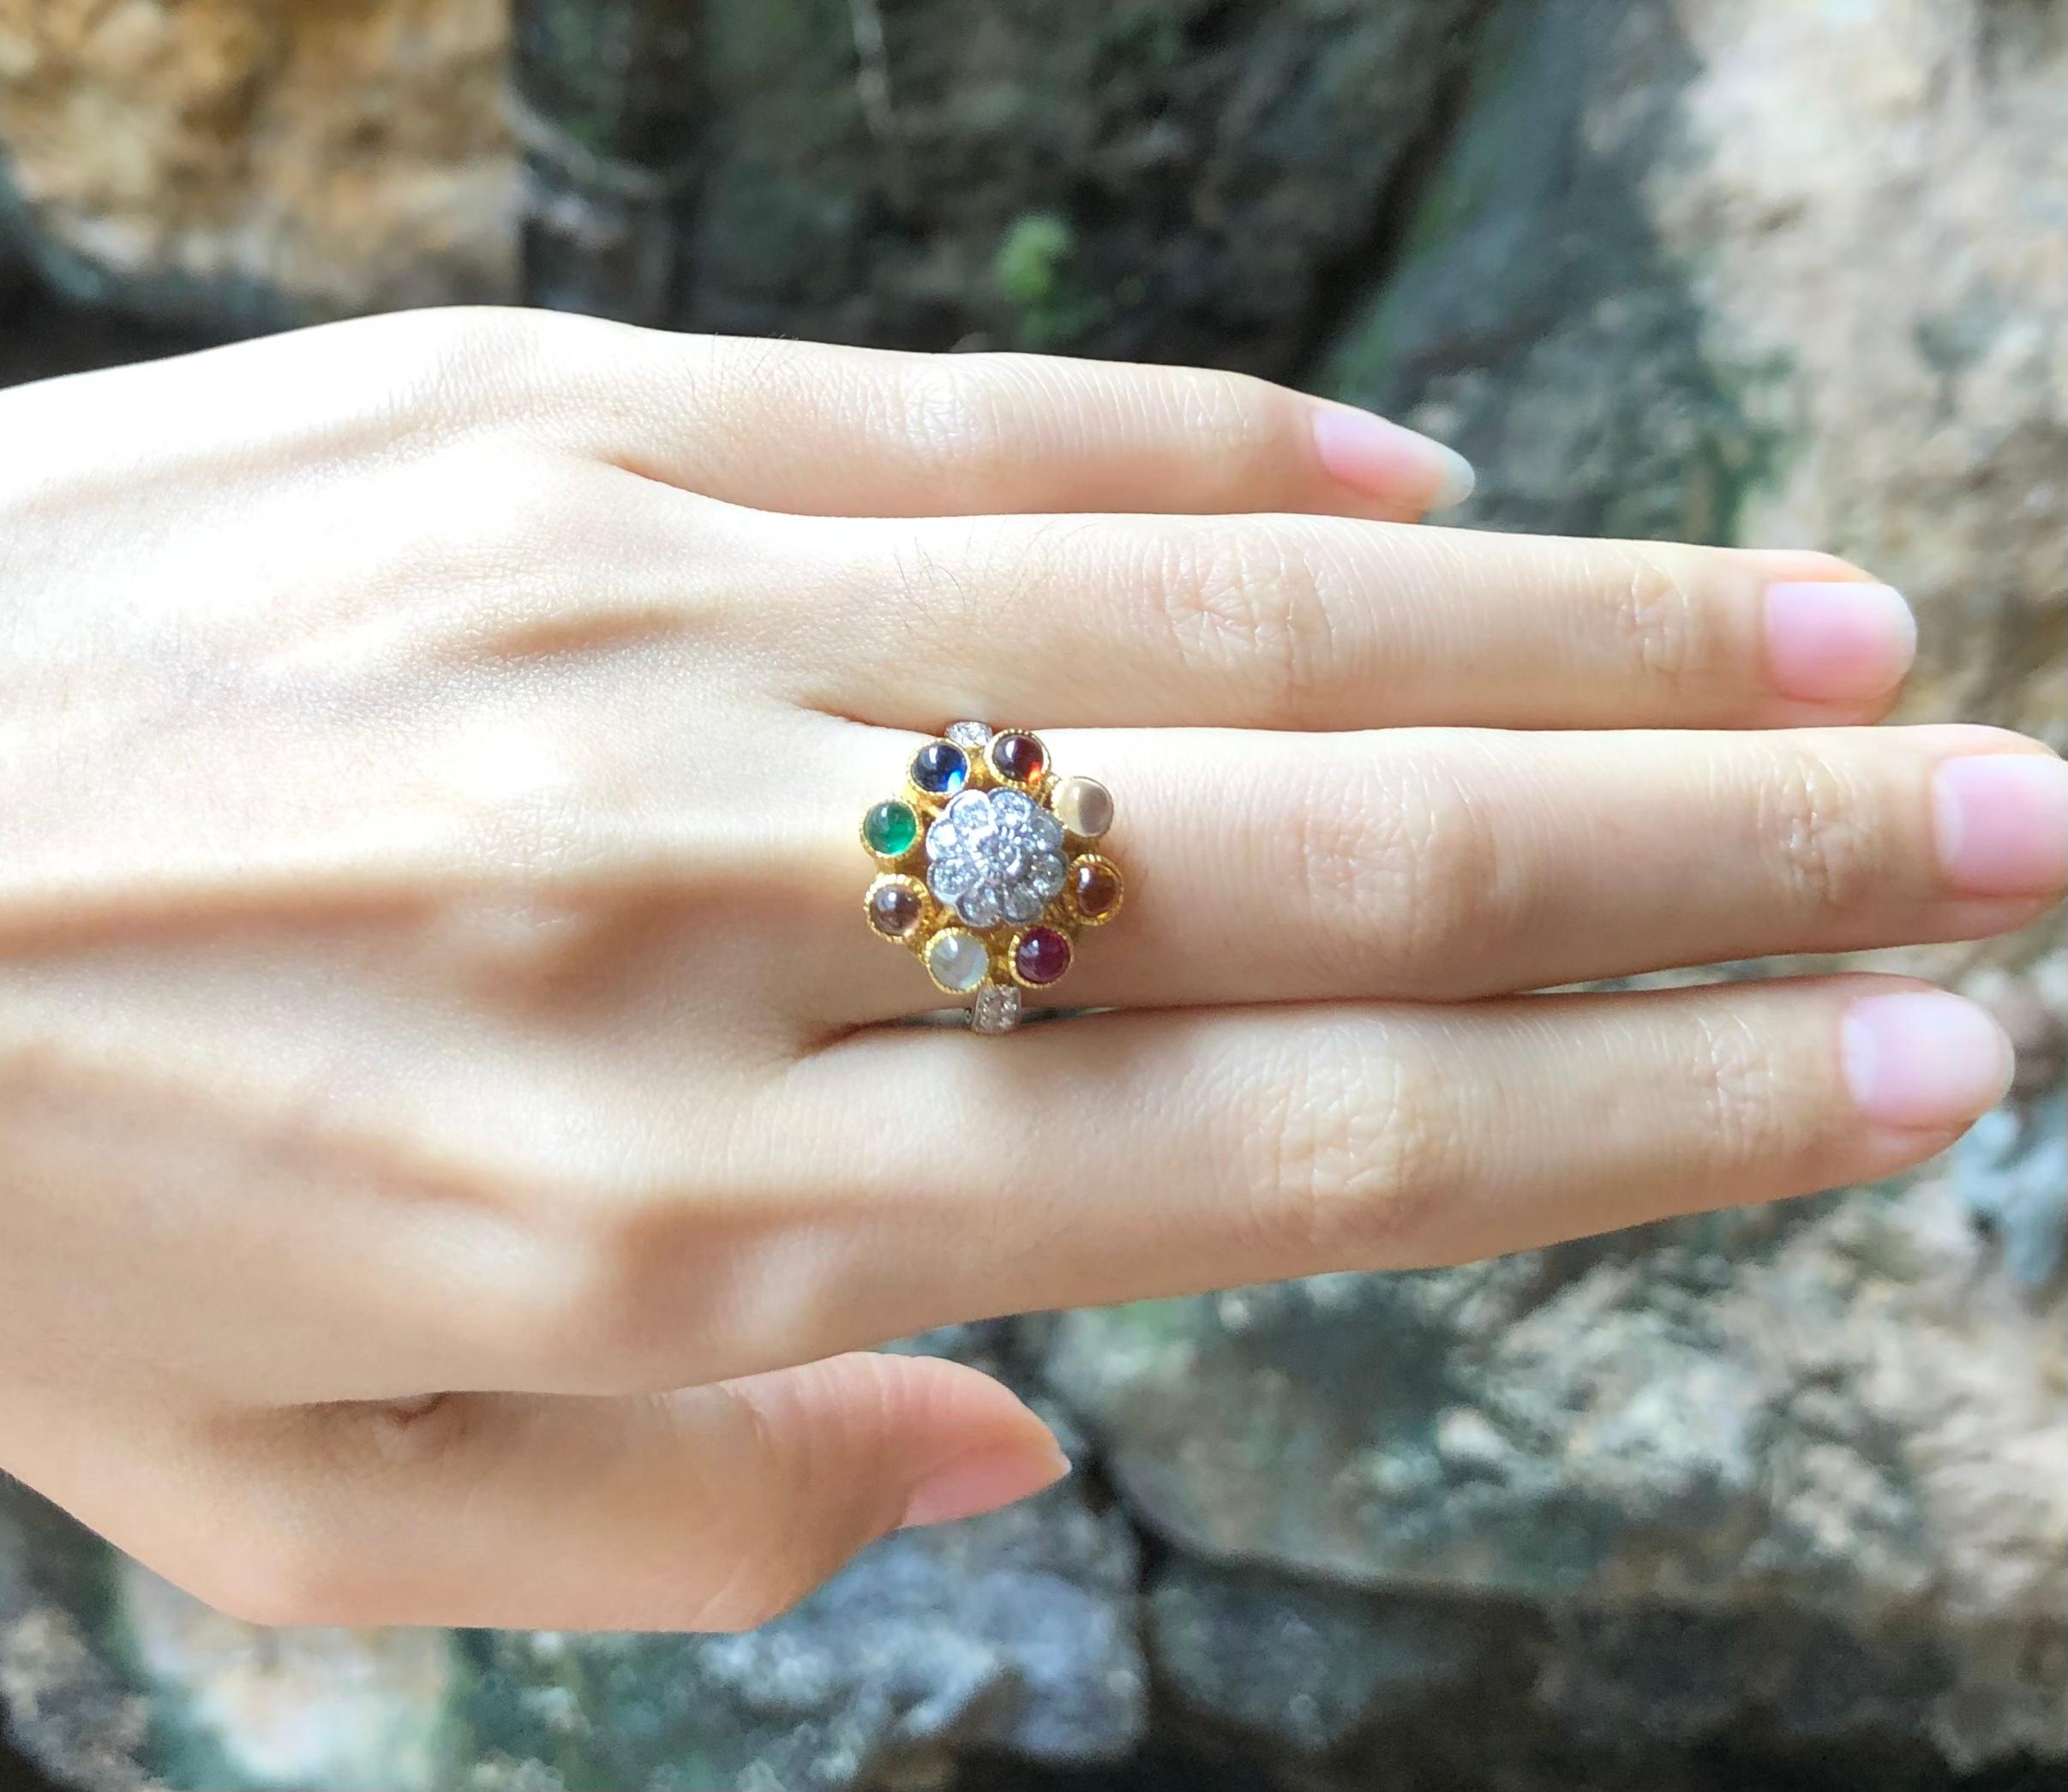 9-Gems (Ruby, Blue Sapphire, Emerald, Yellow Sapphire, Cat's Eye, Zircon, Moon Stone, Garnet) 1.95 carats with Diamond 0.48 carat Ring set in 18 Karat Gold Settings

In the ancient time in Thailand, 9-gemstone jewelry is awarded to the General who